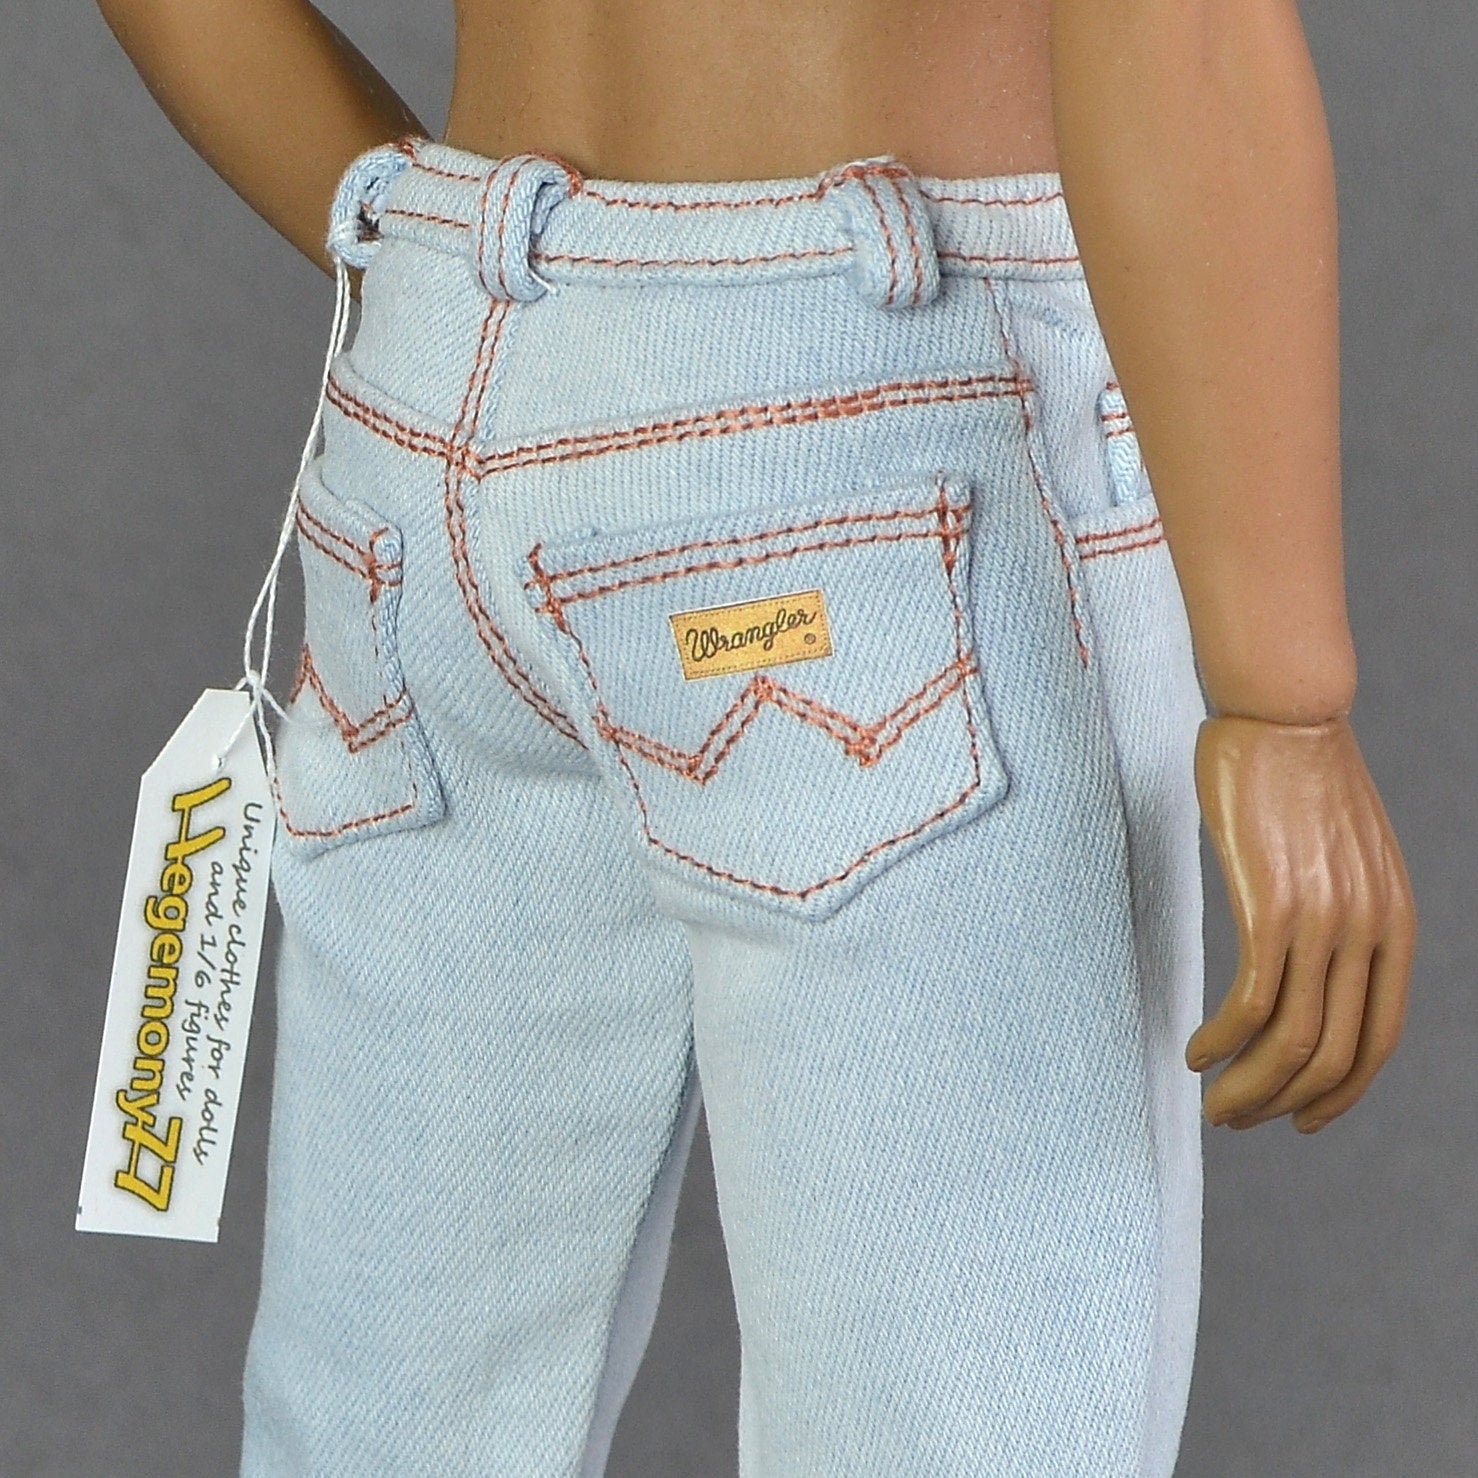 1/6th Scale Light Blue Jeans Inspired by Freddie Mercury - Etsy UK